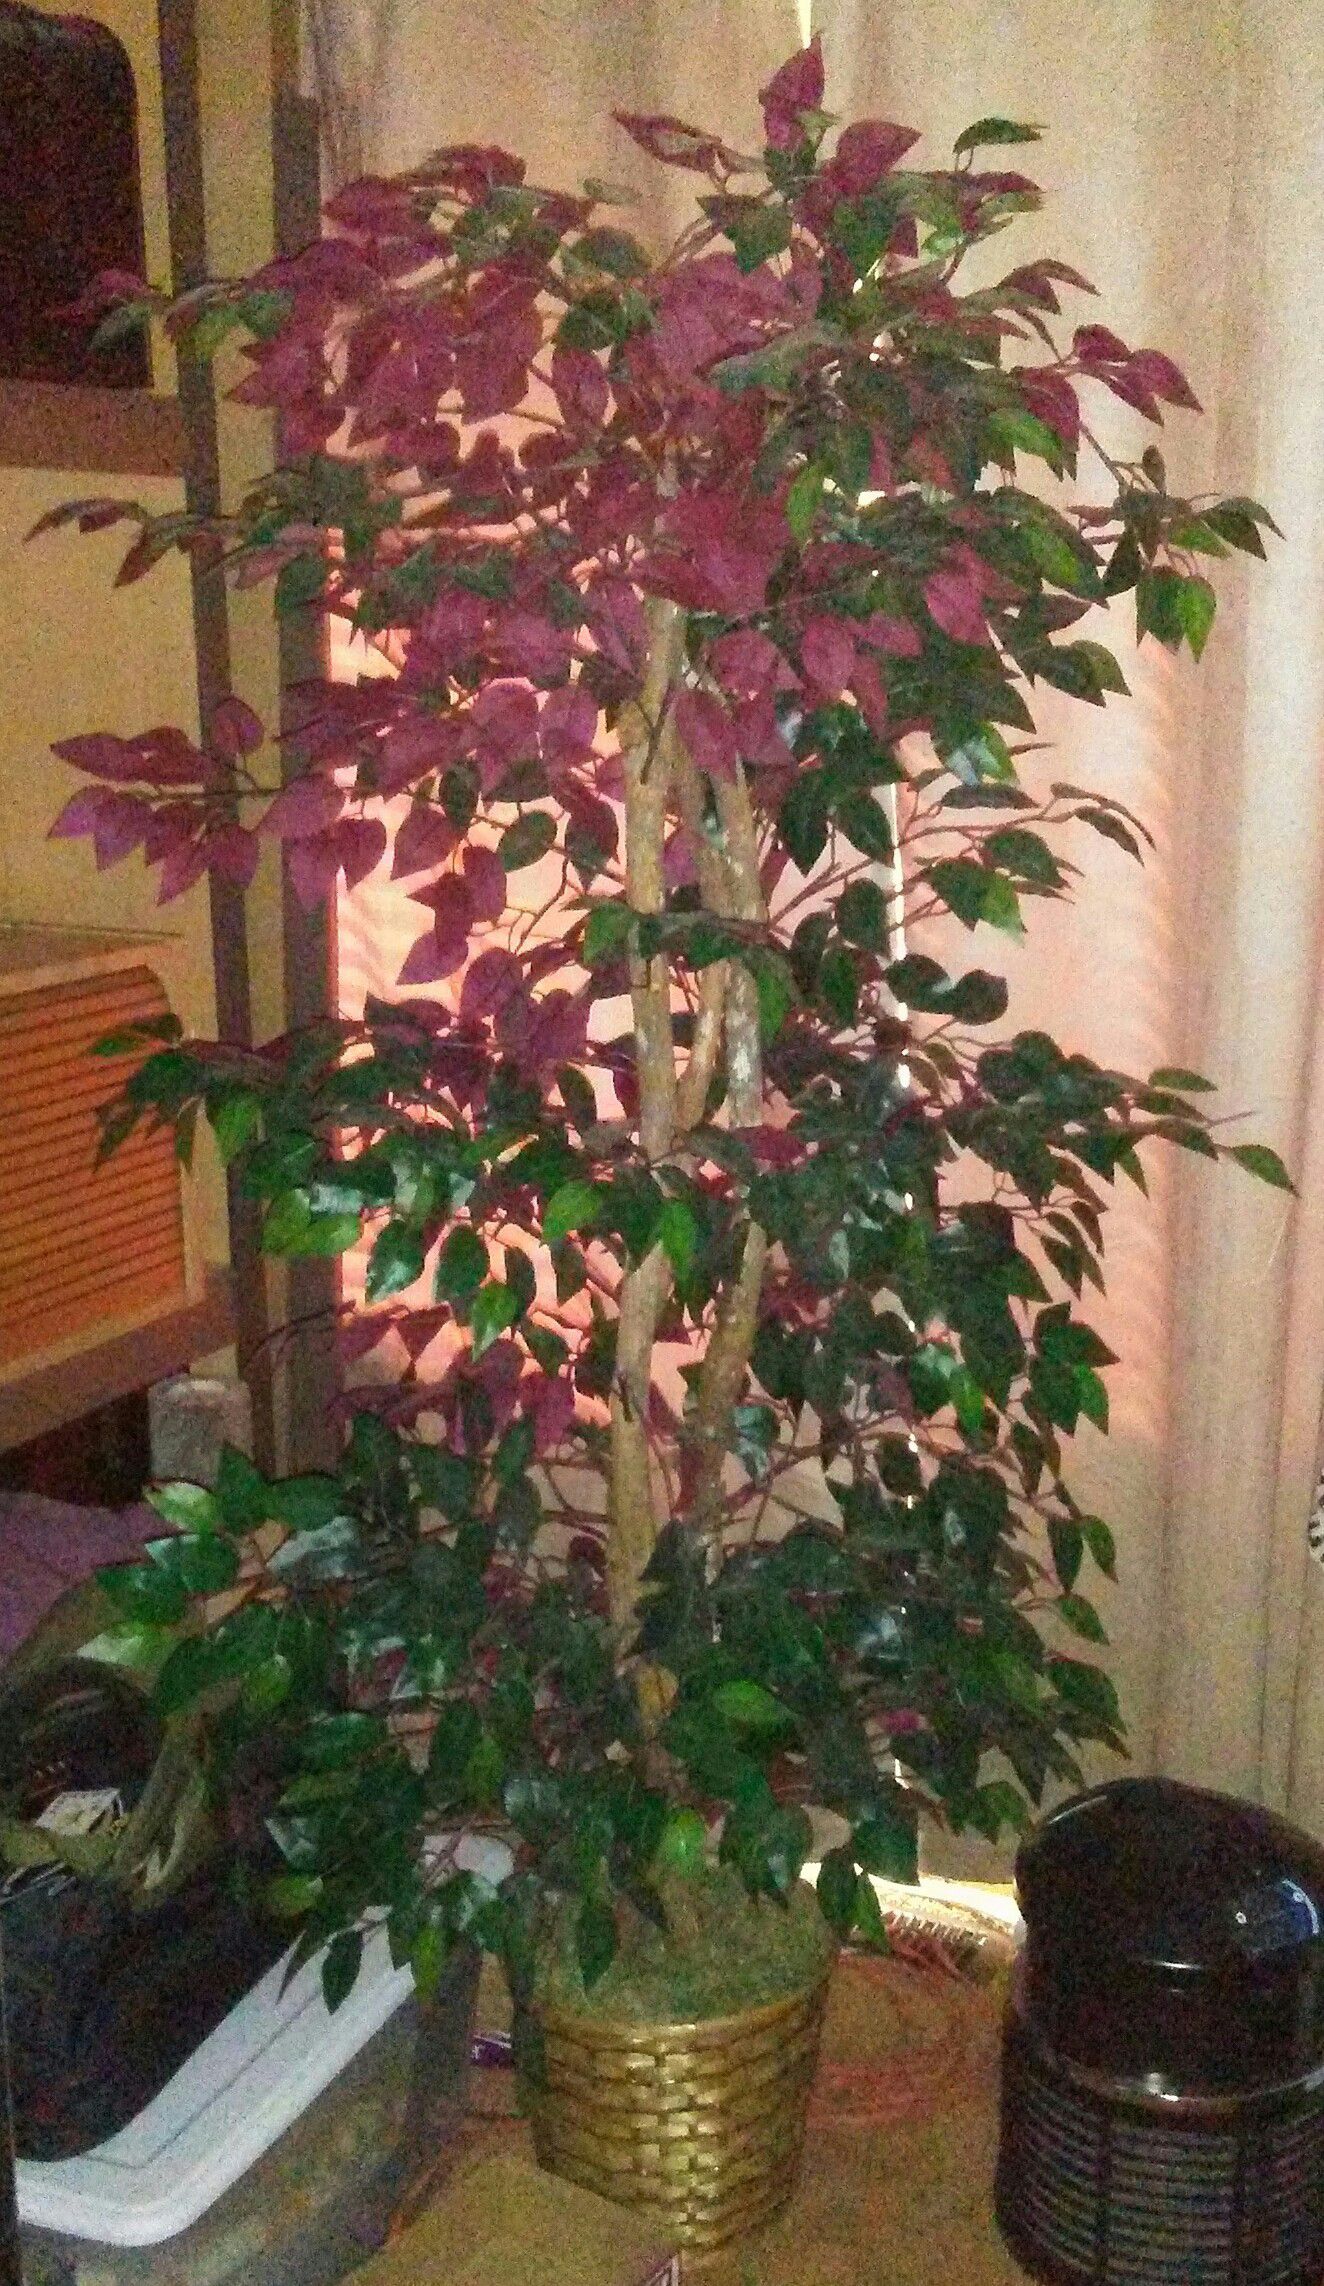 Very Nice Pretty Colored Leaves - Artificial Plant!!!